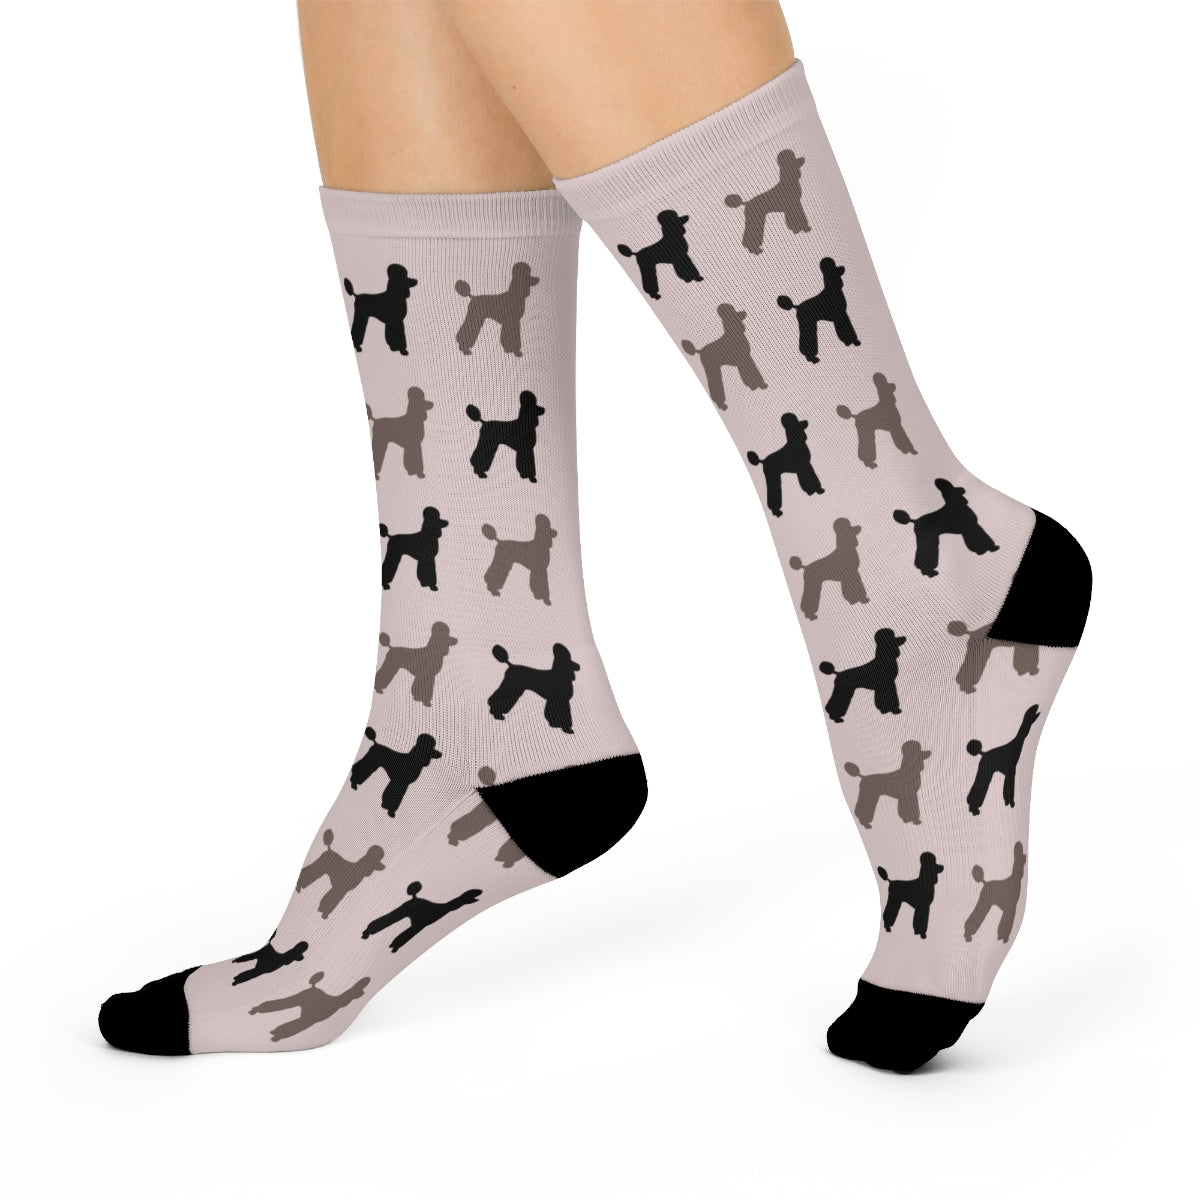 Poodle Crew Socks! 50's Style, great gift! classic, preppy design Standard Poodle - The Dapper Dogg